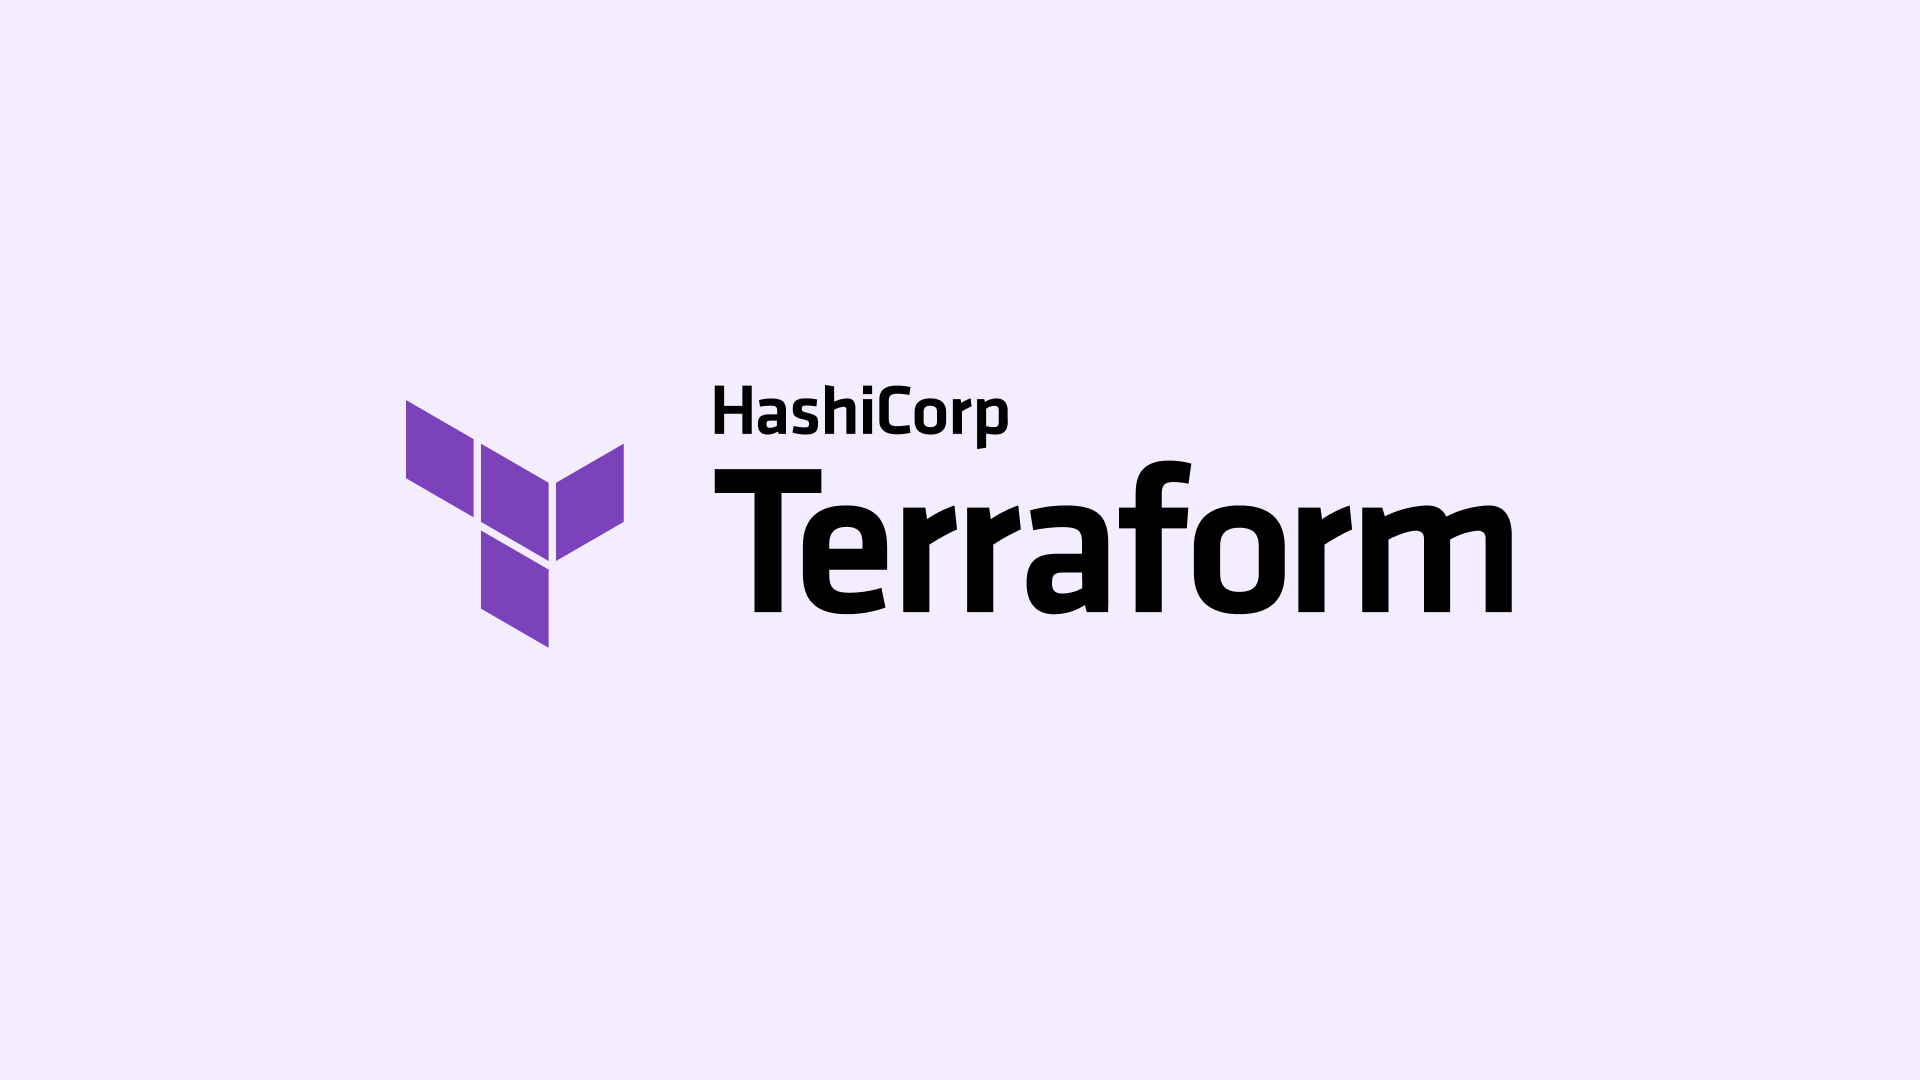 How To: Sort a List of Terraform Objects by Attribute